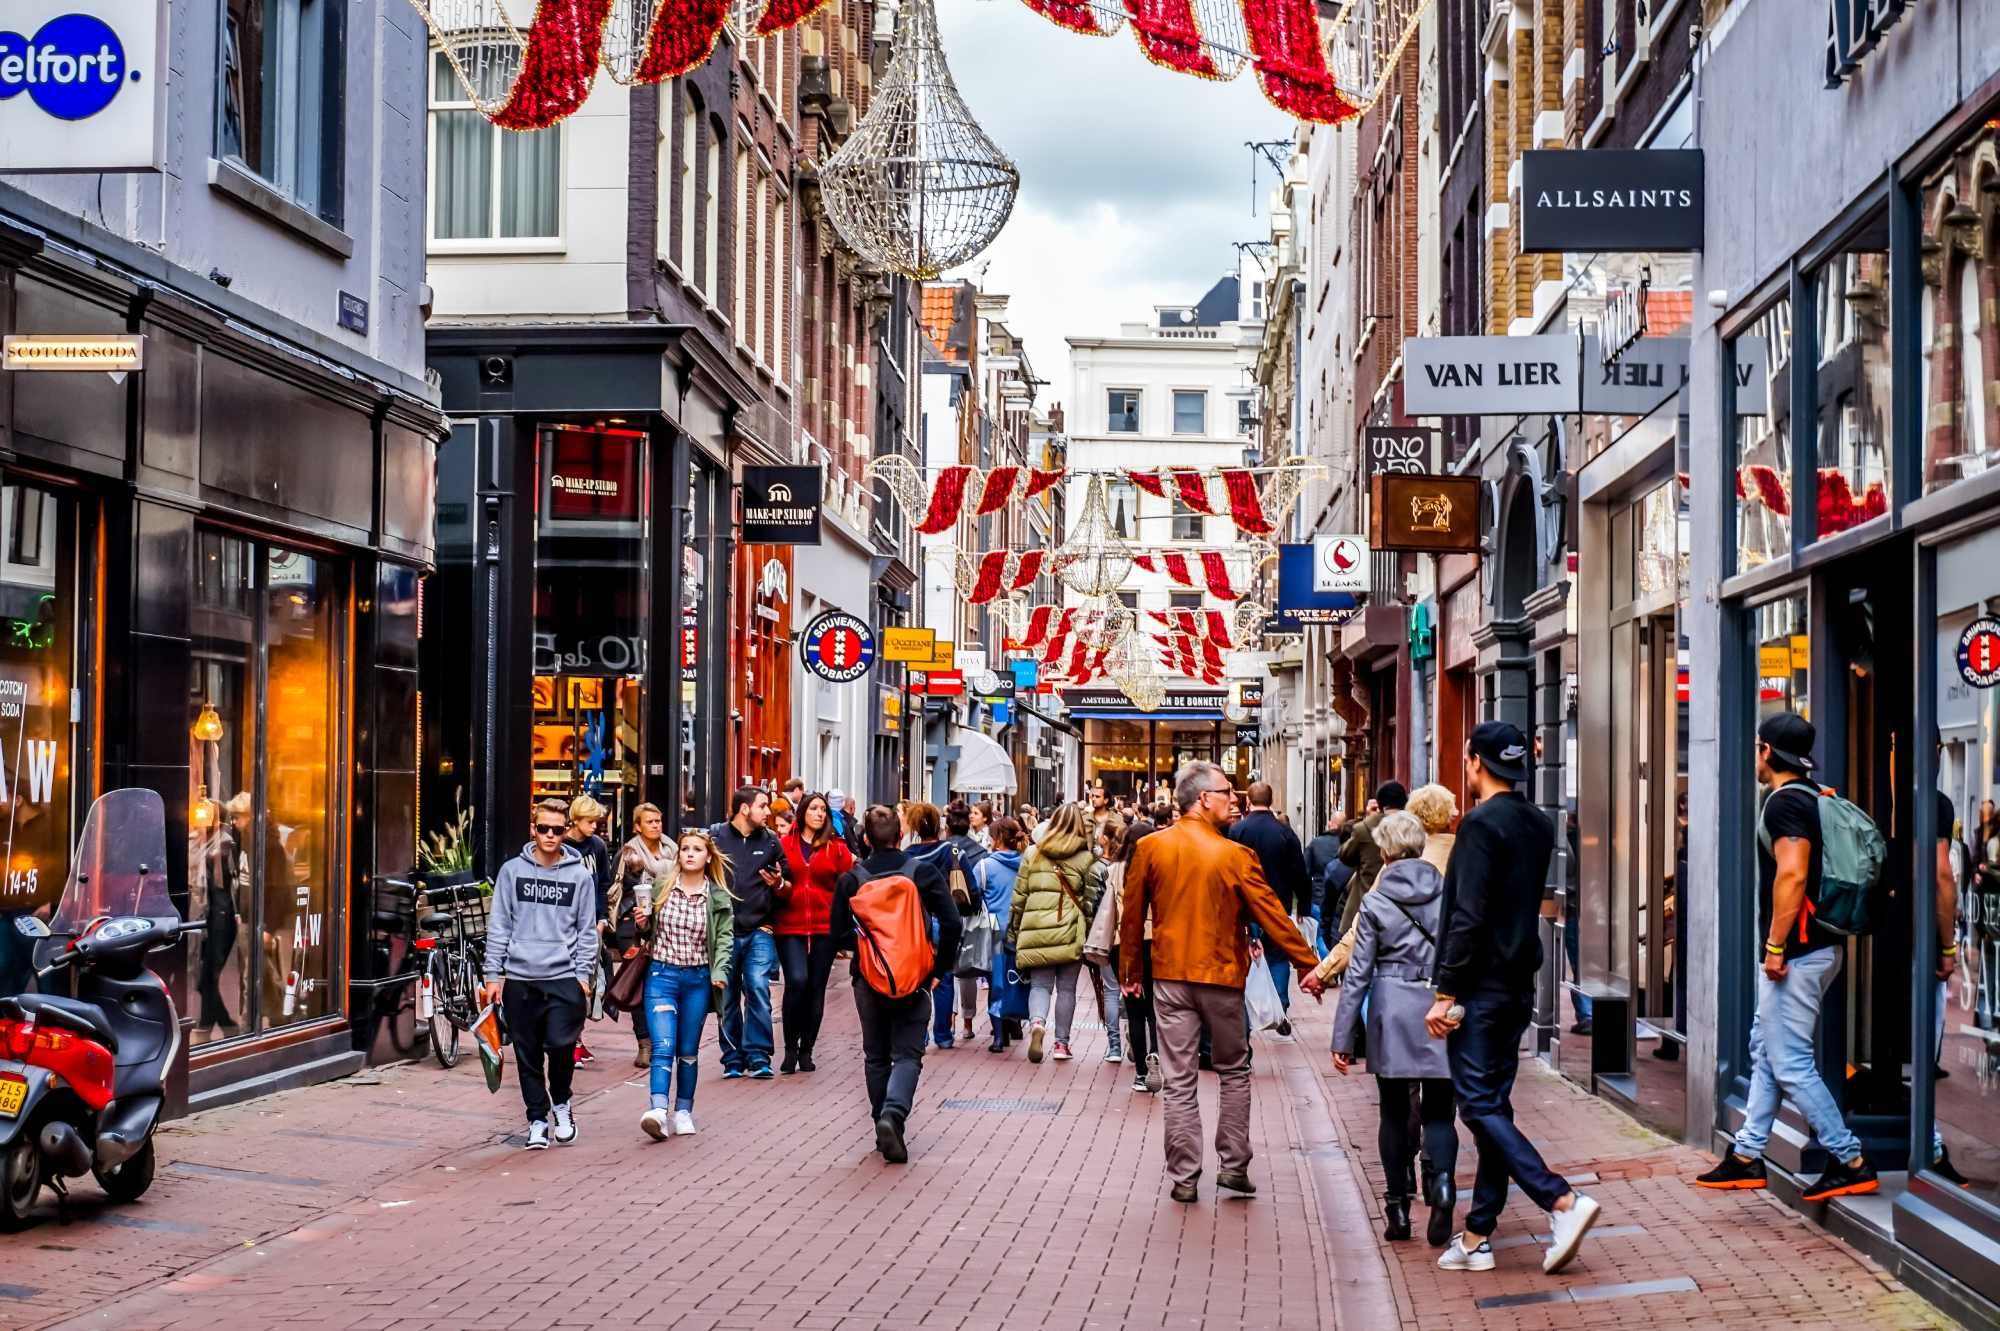 Dutch stores on a shopping street in the Netherlands